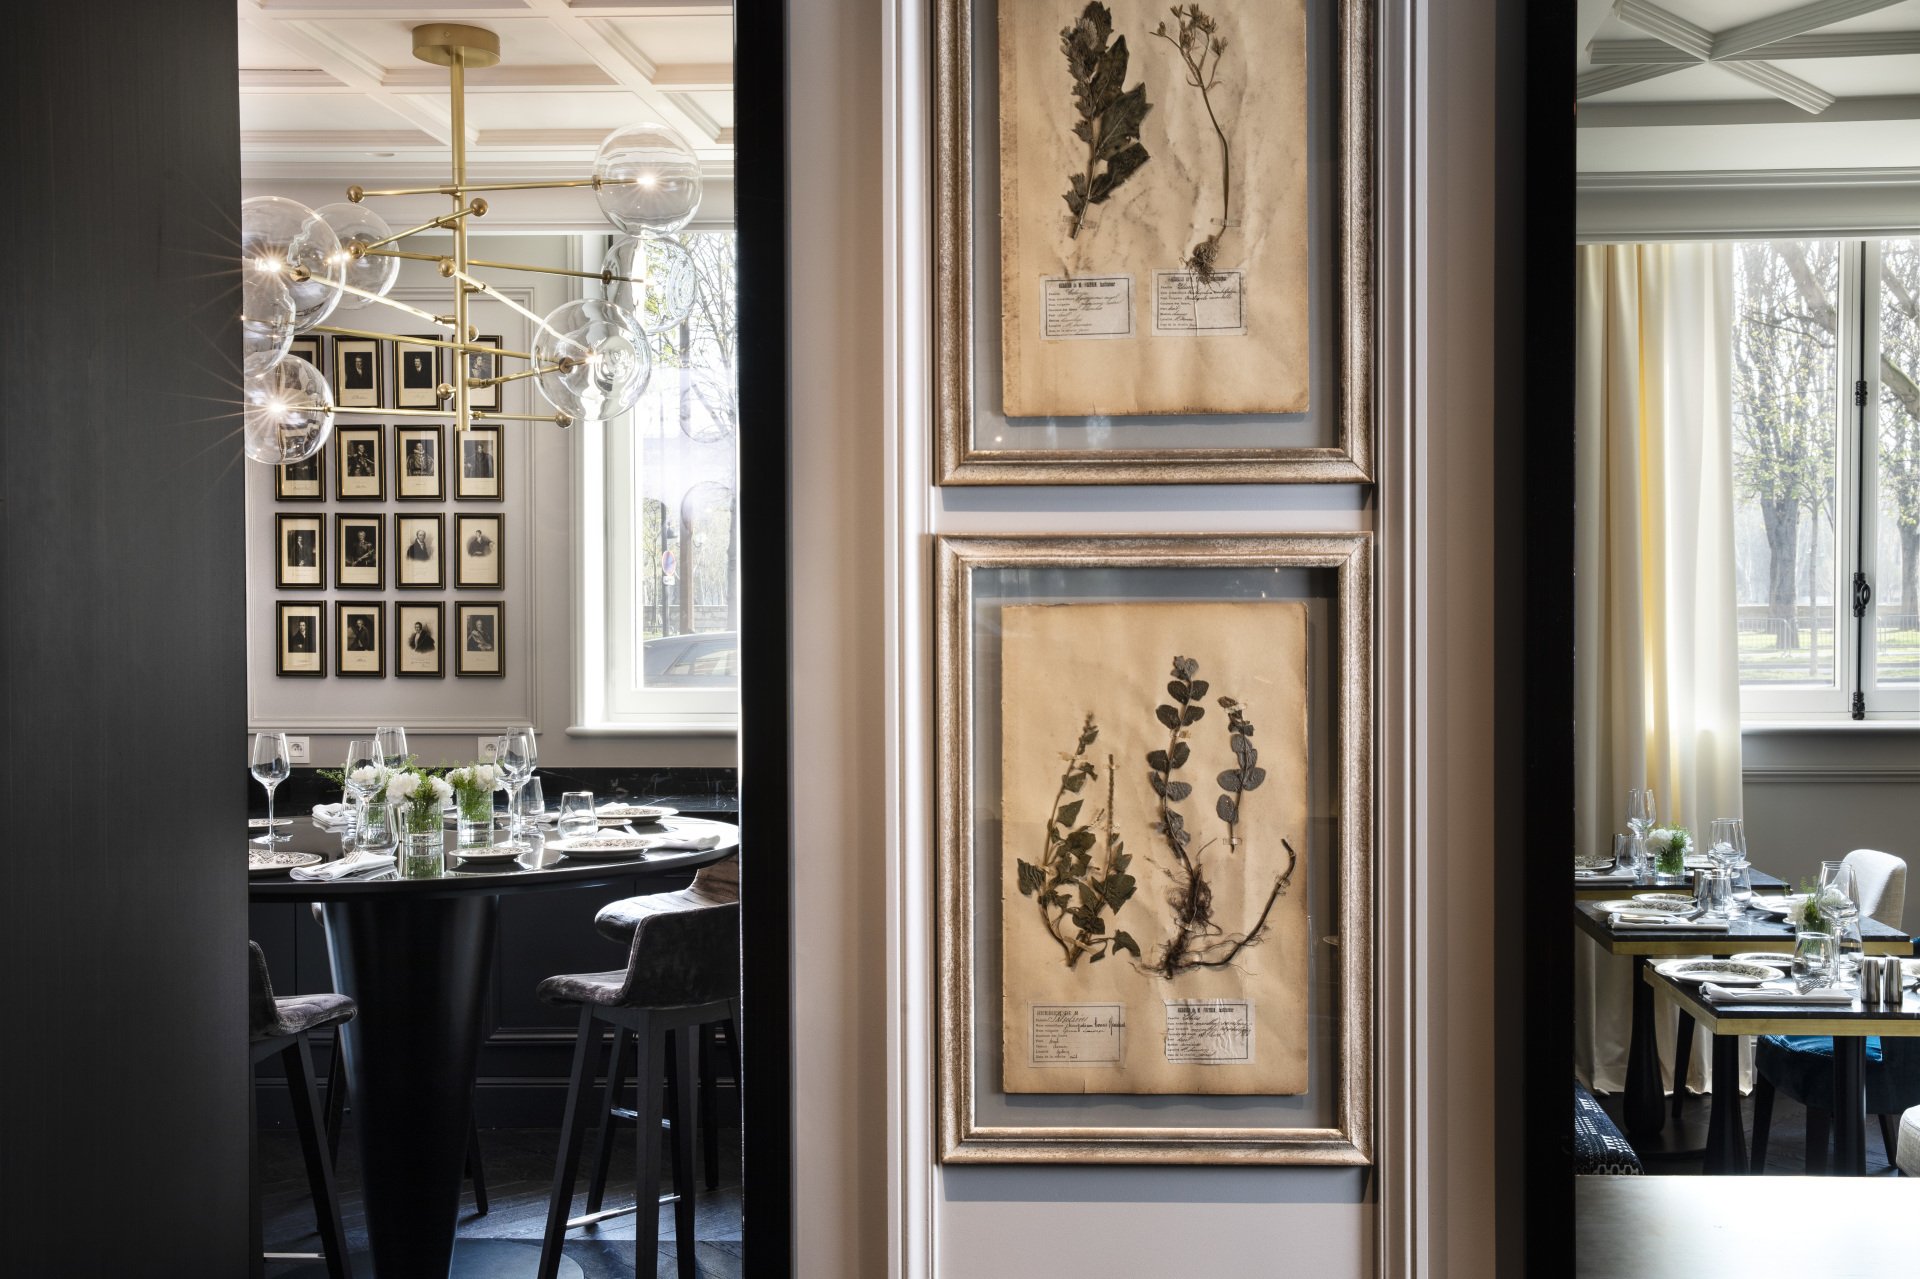 Decoration and artworks in the restaurant Hotel Le Damantin in Paris designed by the French interior design studio jean-philippe nuel